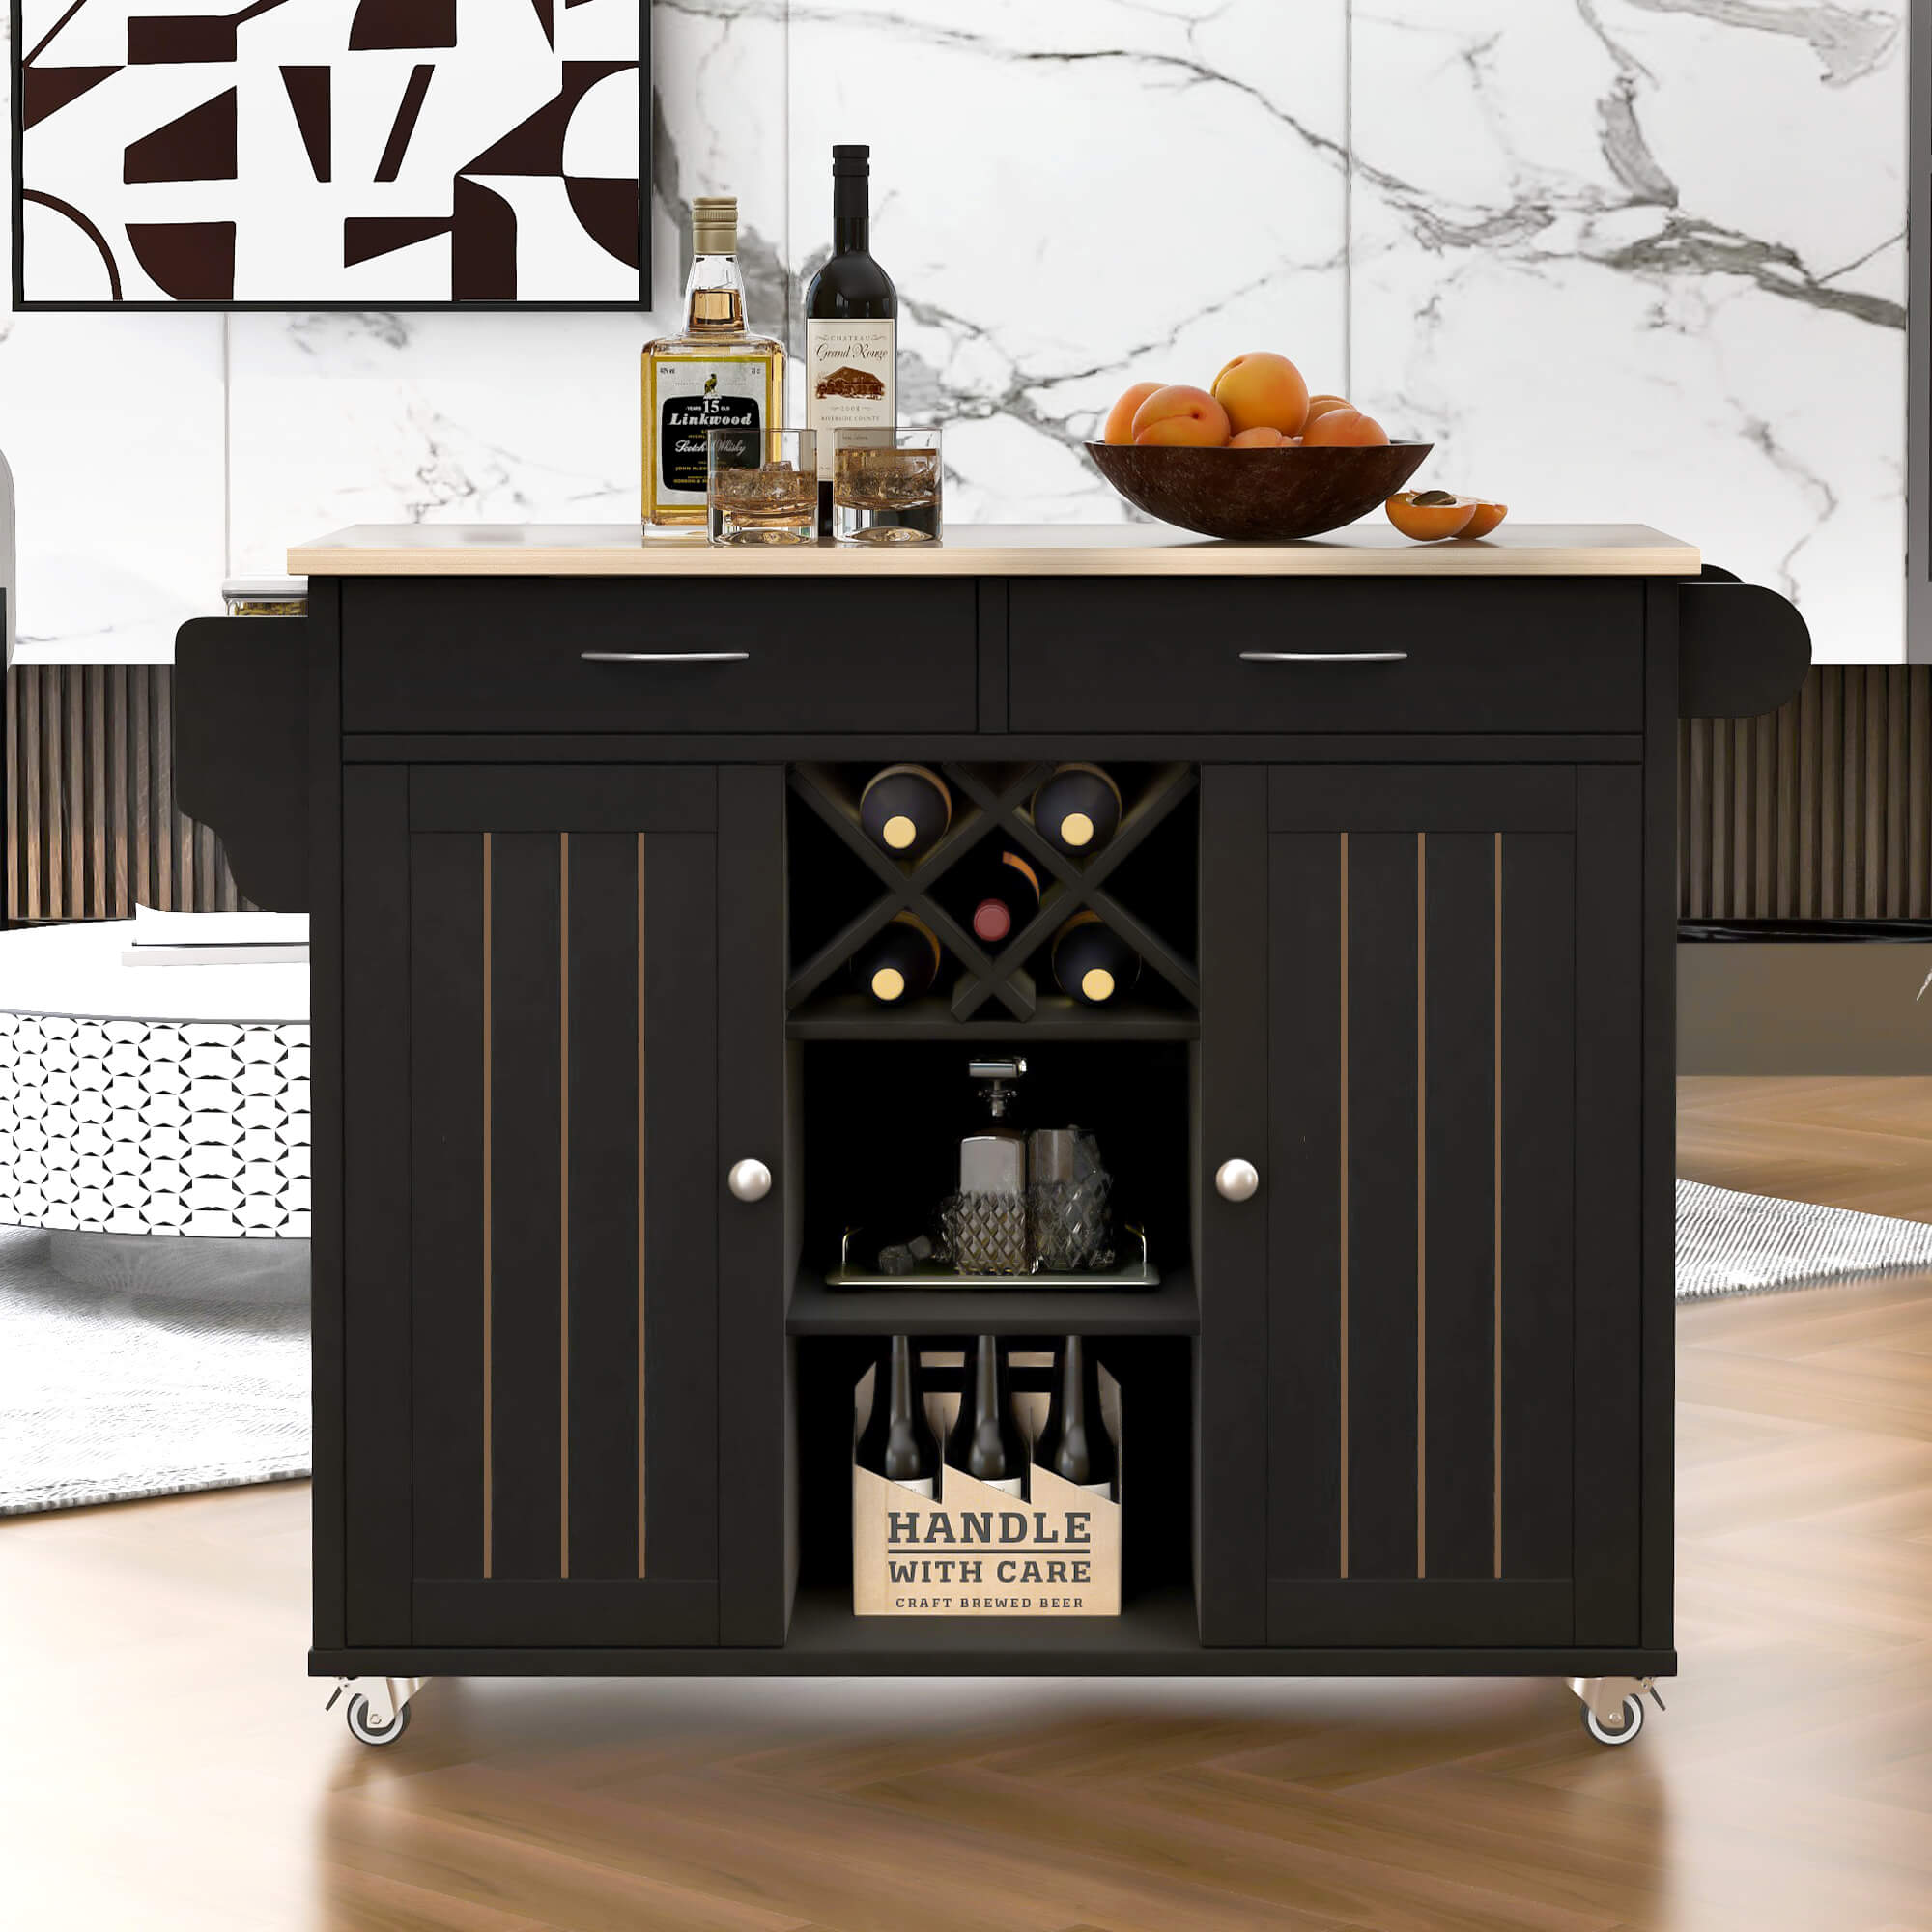 48" Kitchen Island Cart with Locking Wheels, 2 Storage Cabinets, 2 Drawers, Removable Wine Rack, Spice & Towel Rack, Black